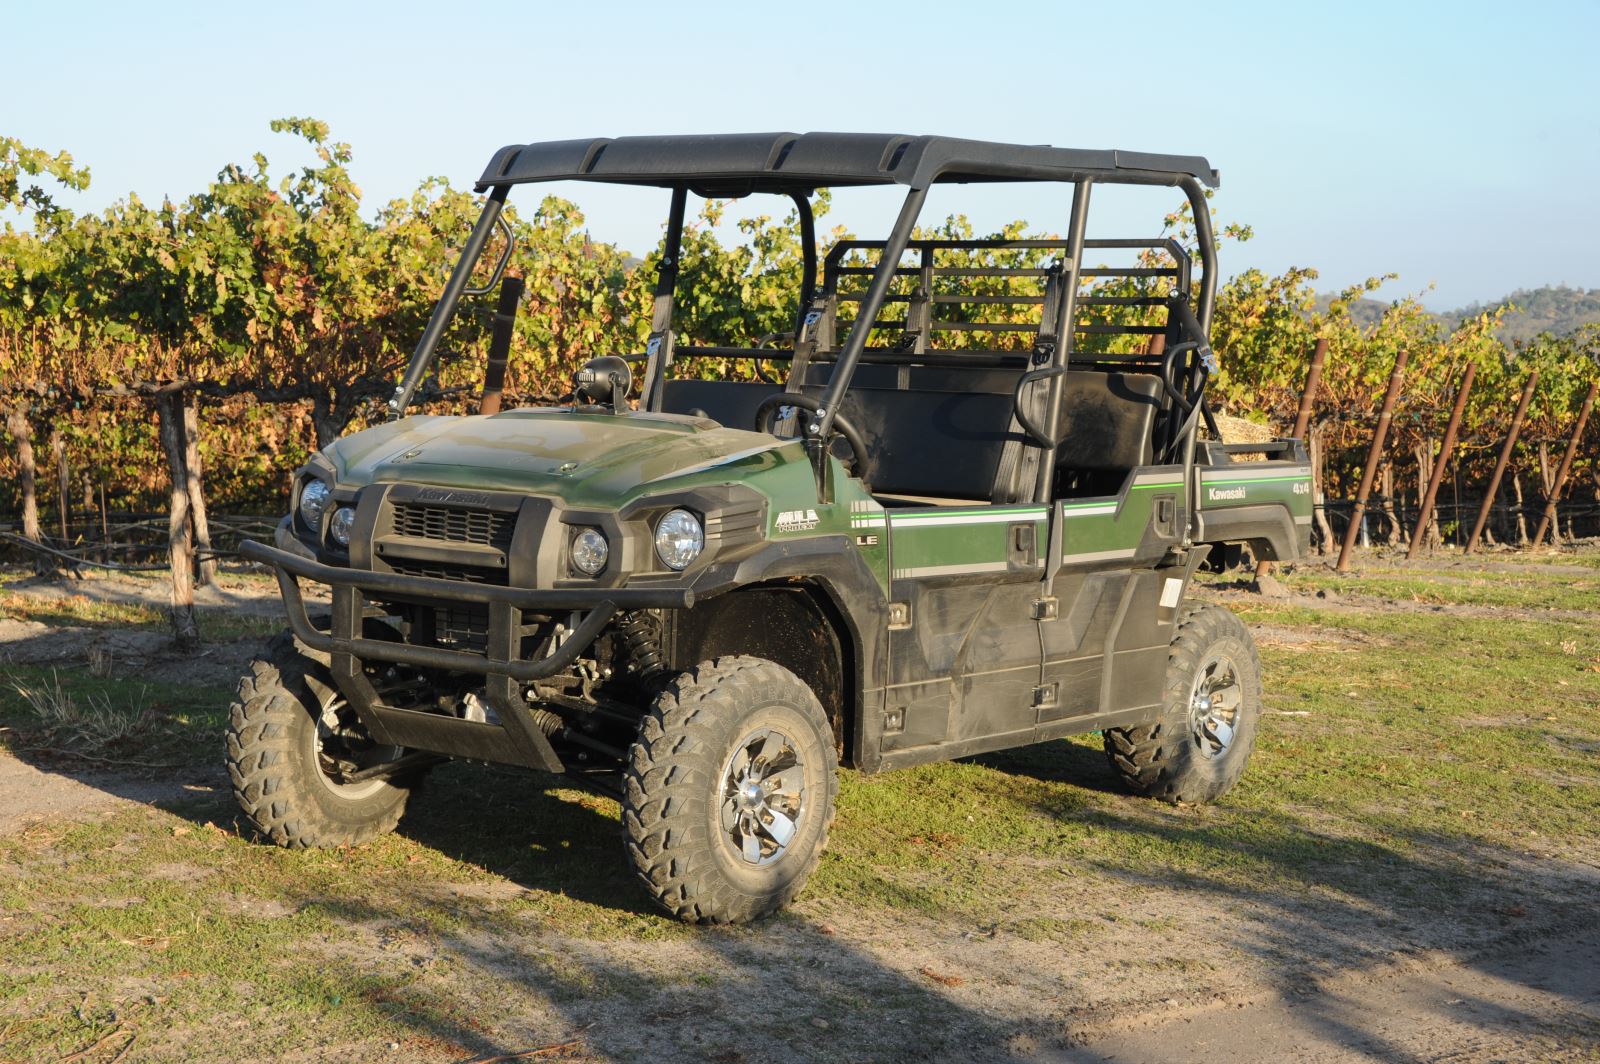 Kawasaki Mule Pro-FXT: Mixing Play With Work | Dirt Toys Magazine